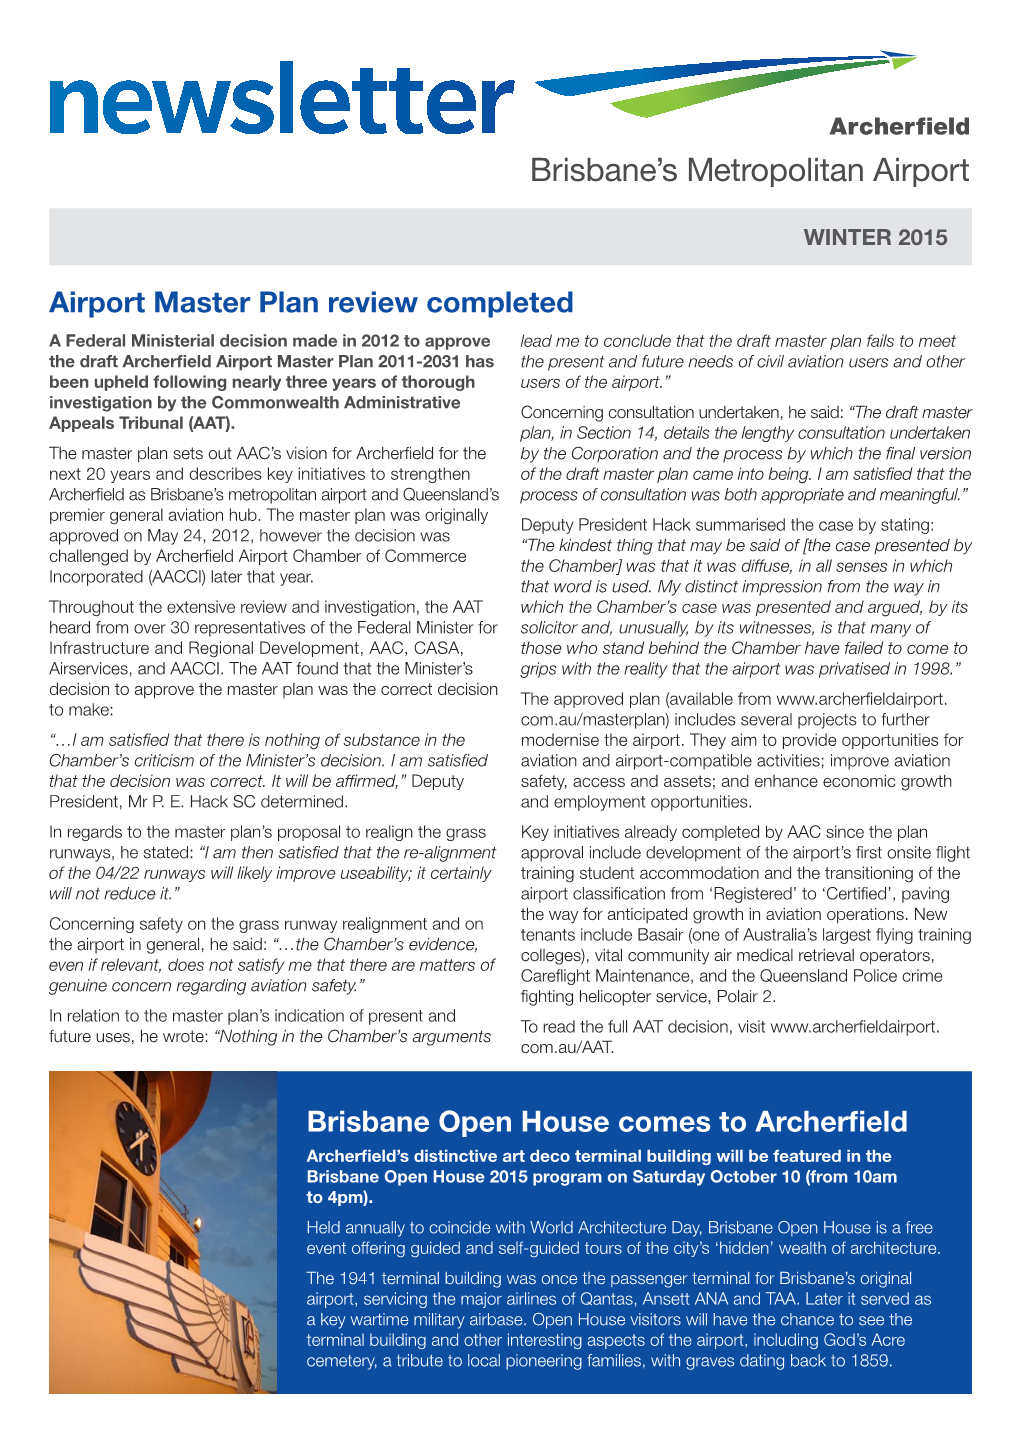 Brisbane Open House Comes to Archerfield Airport Master Plan